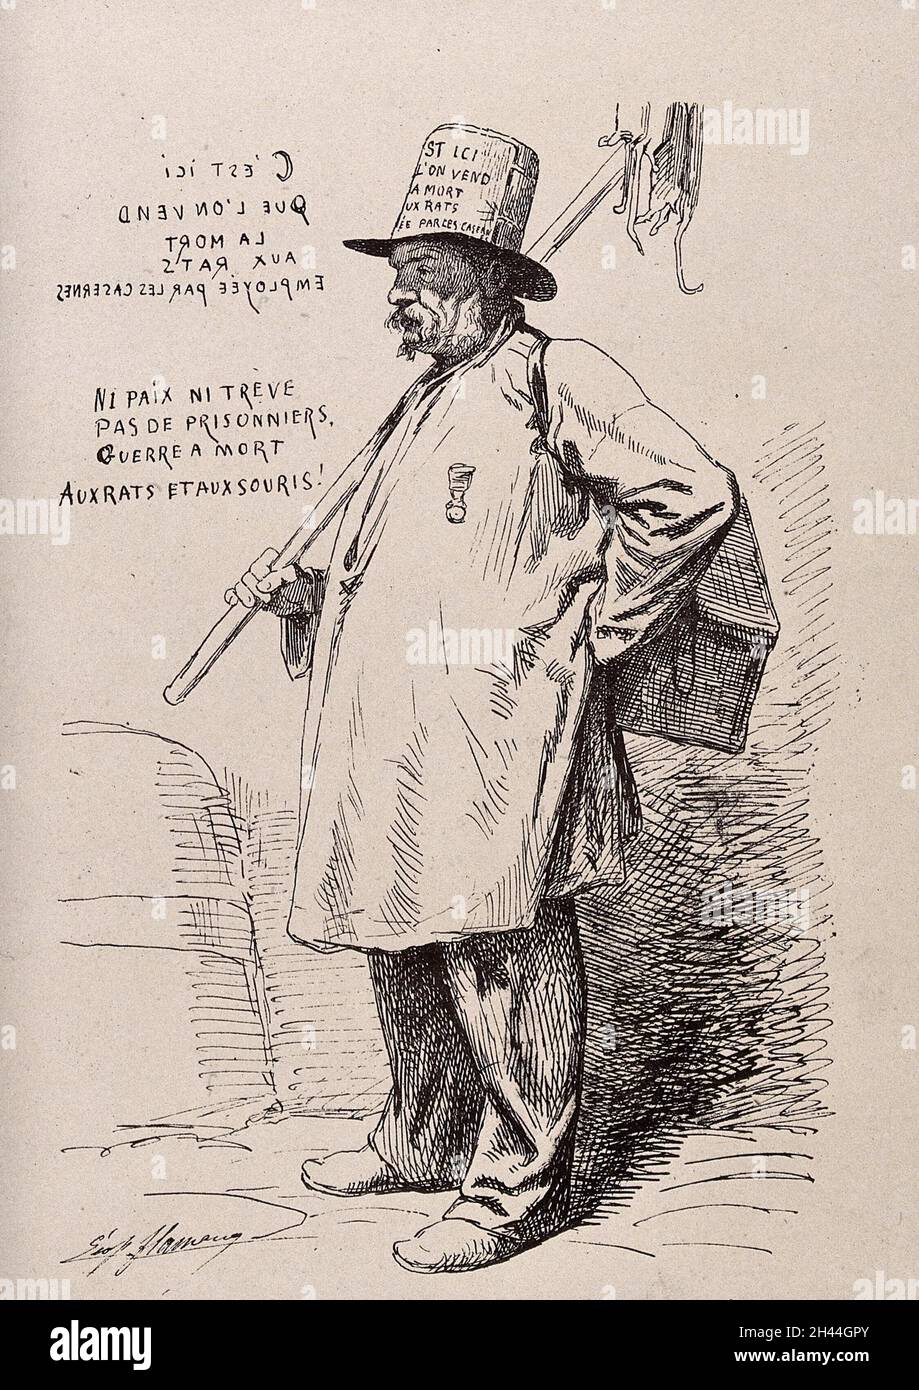 A rat-catcher, carrying a box over his shoulder, is accompanied by